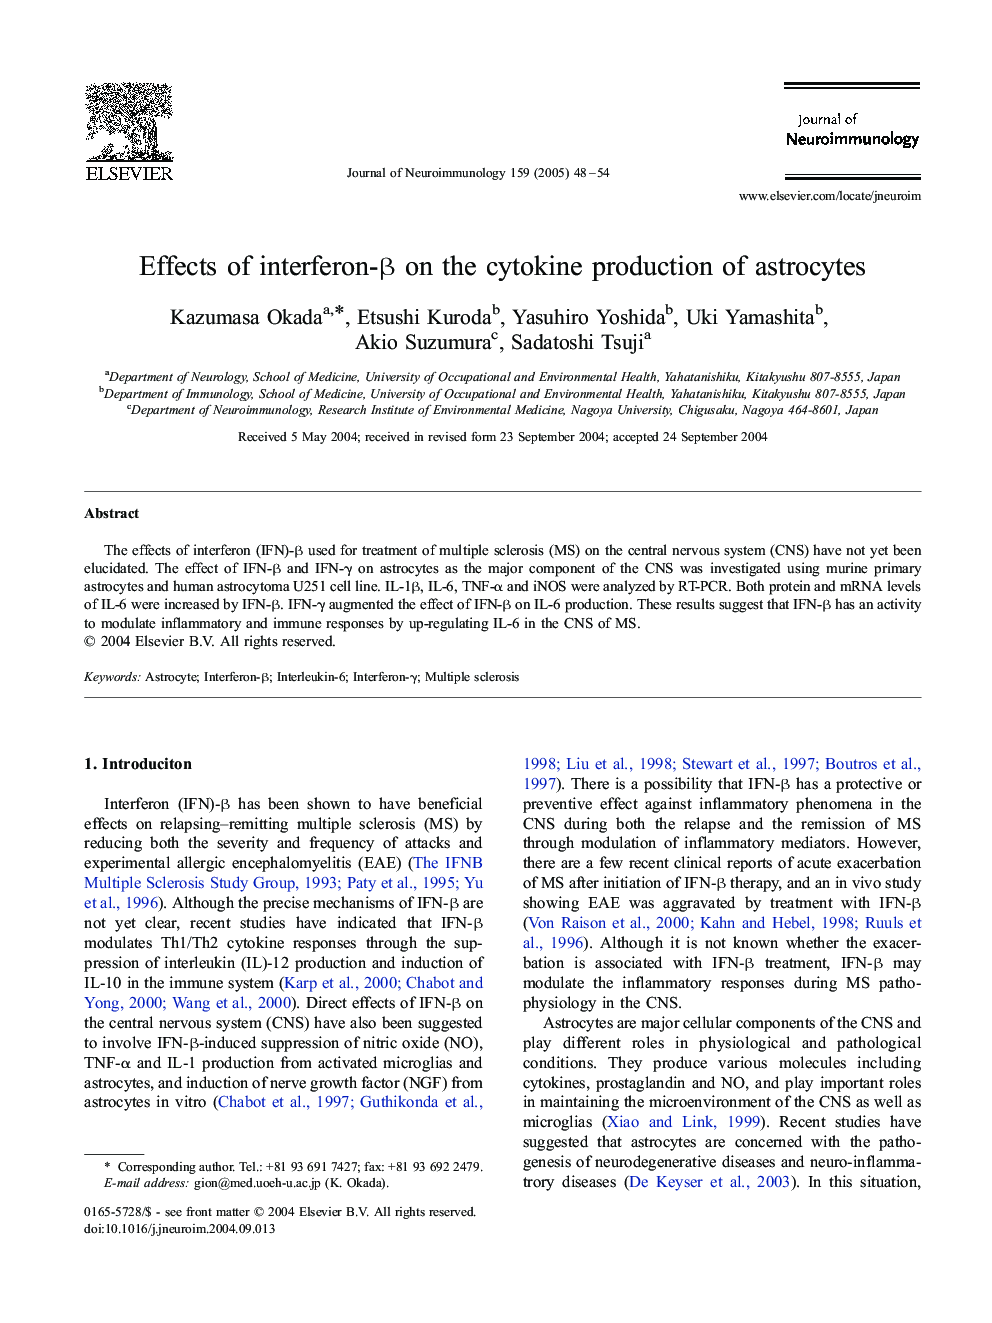 Effects of interferon-Î² on the cytokine production of astrocytes